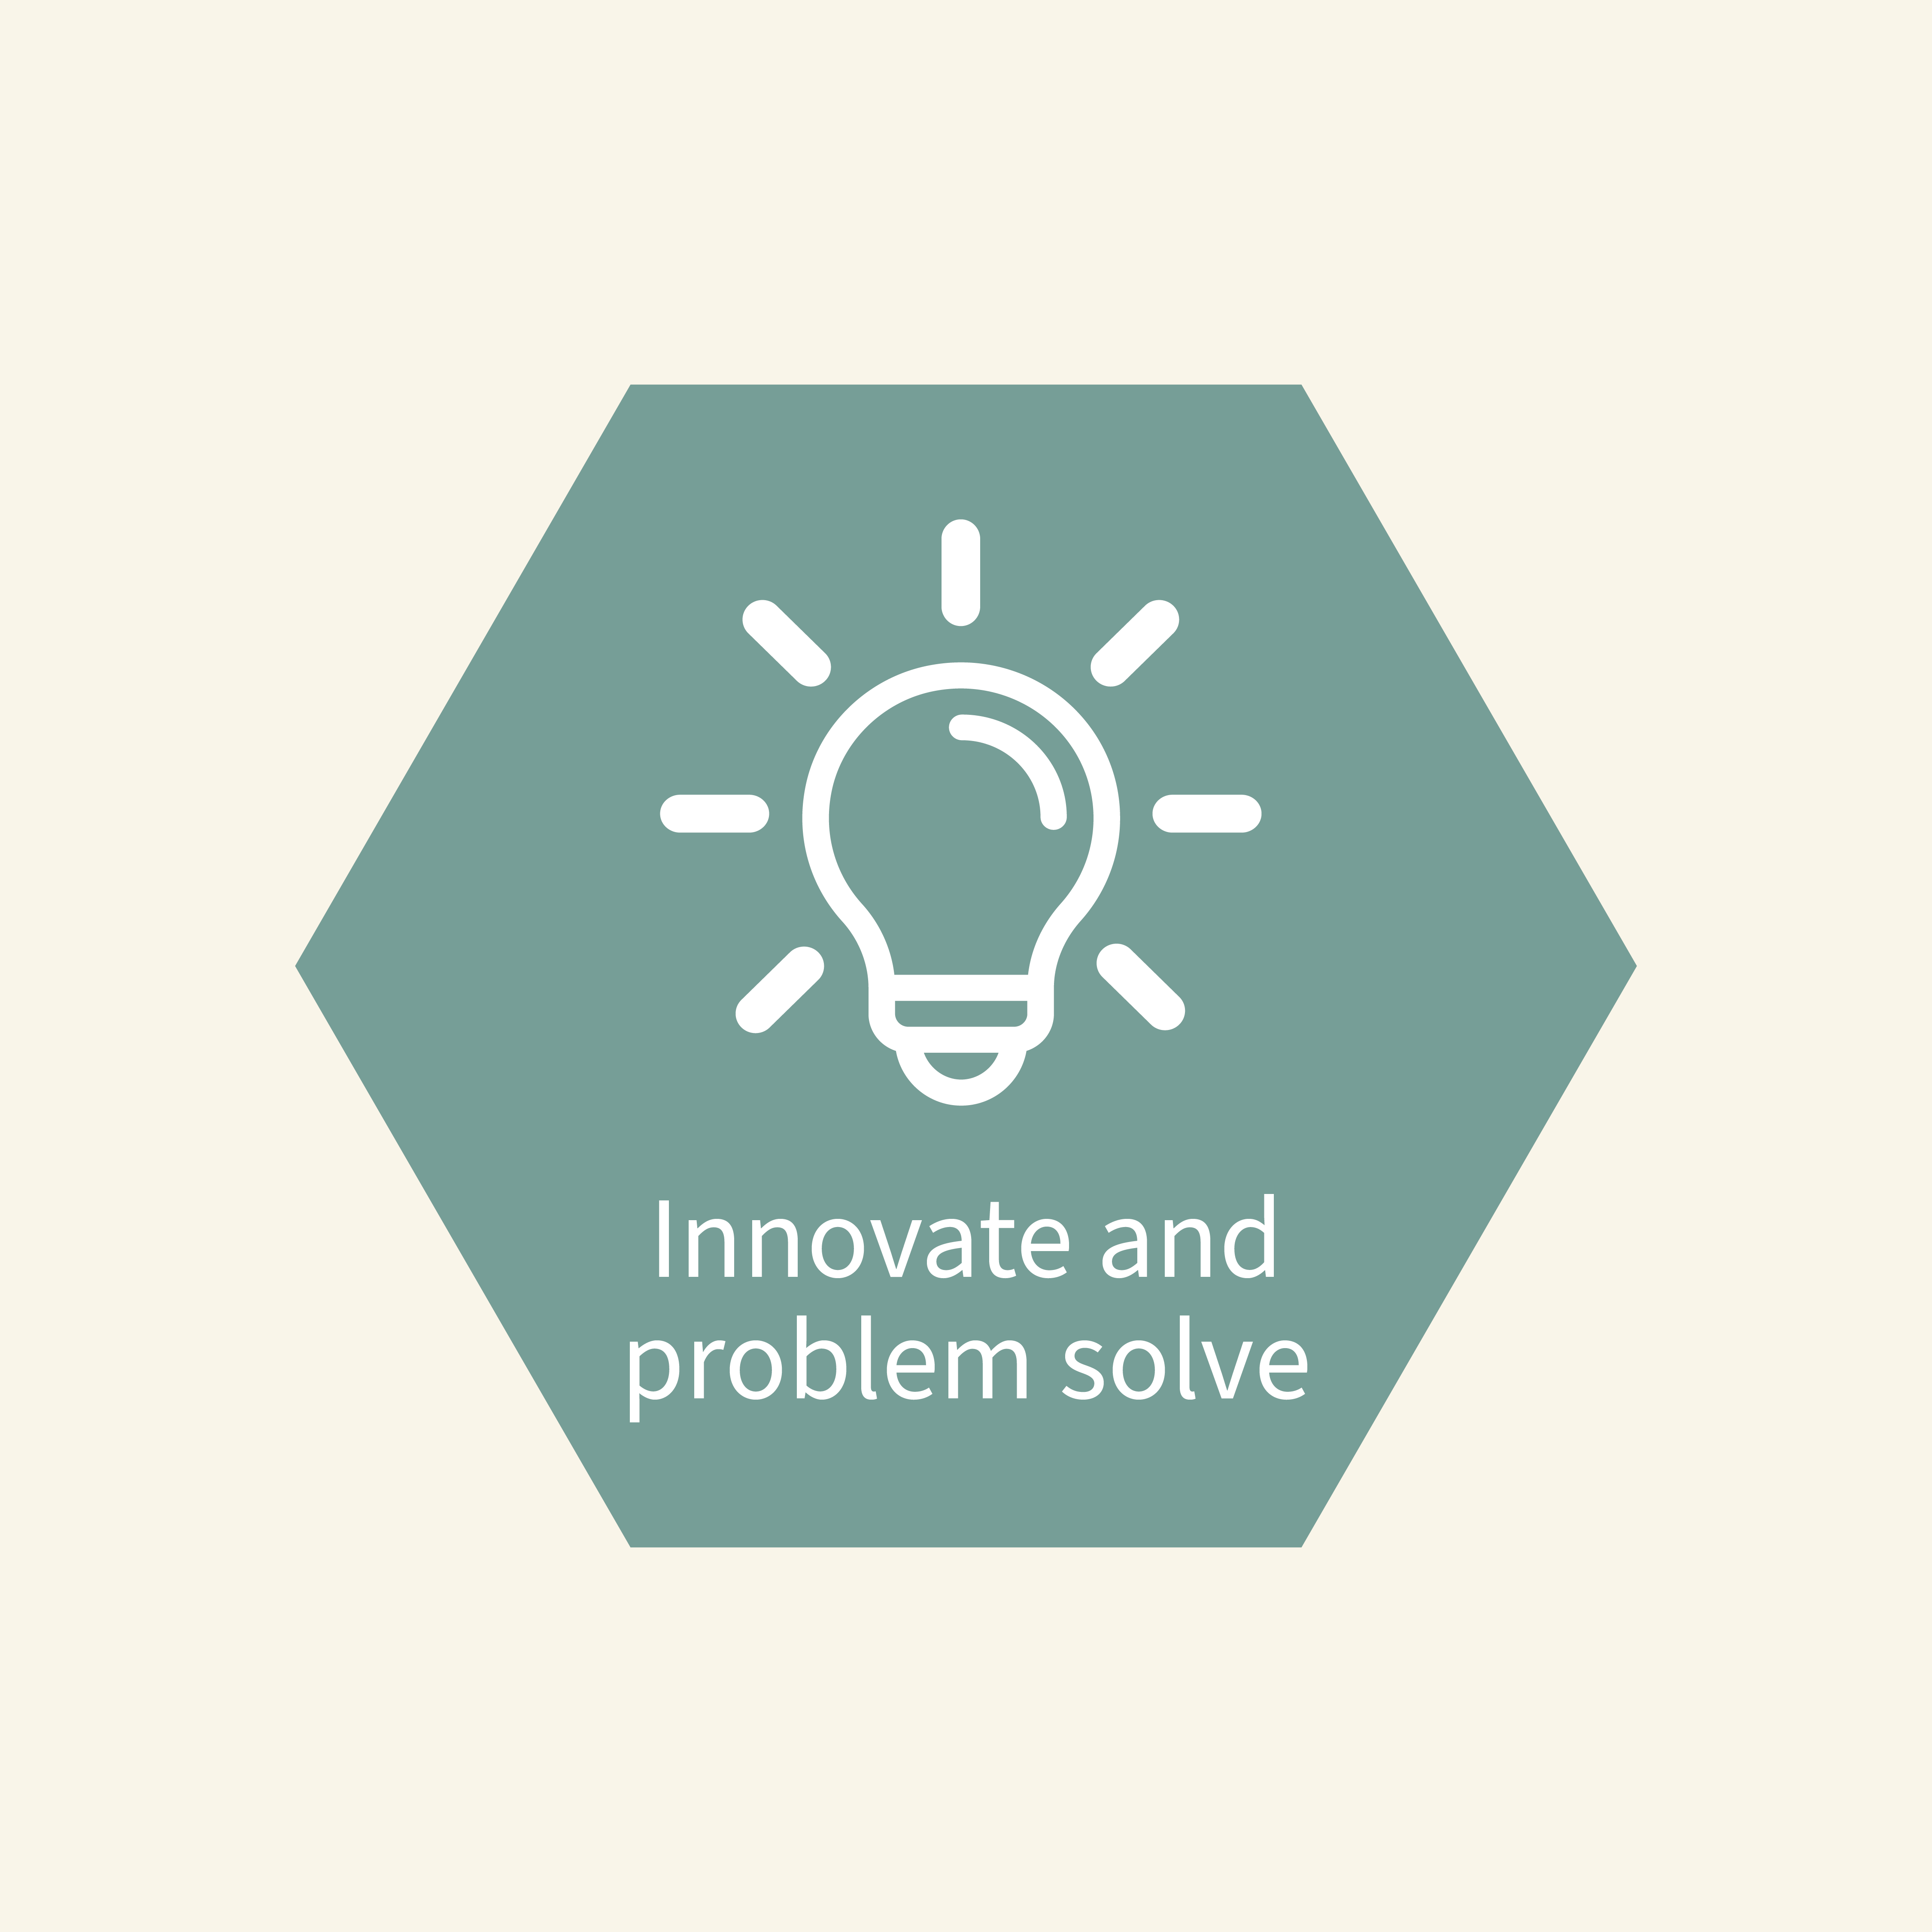 Innovate and problem solve